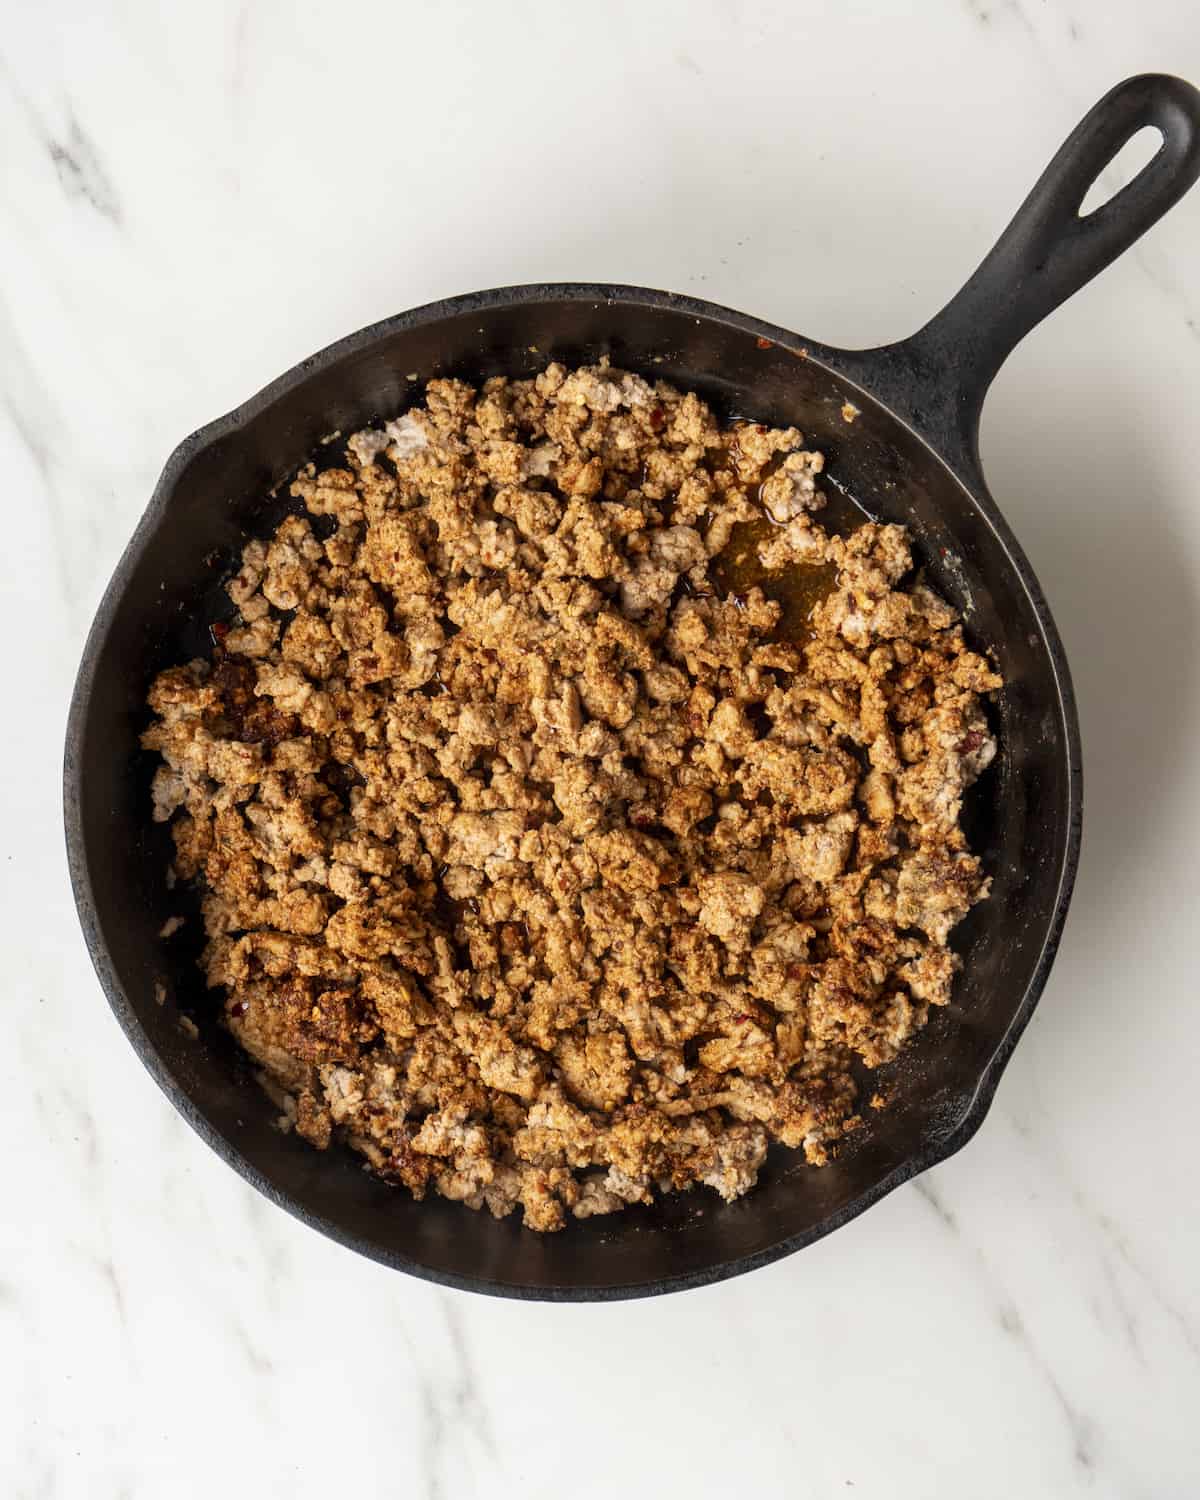 A skillet with sautéed and seasoned ground chicken